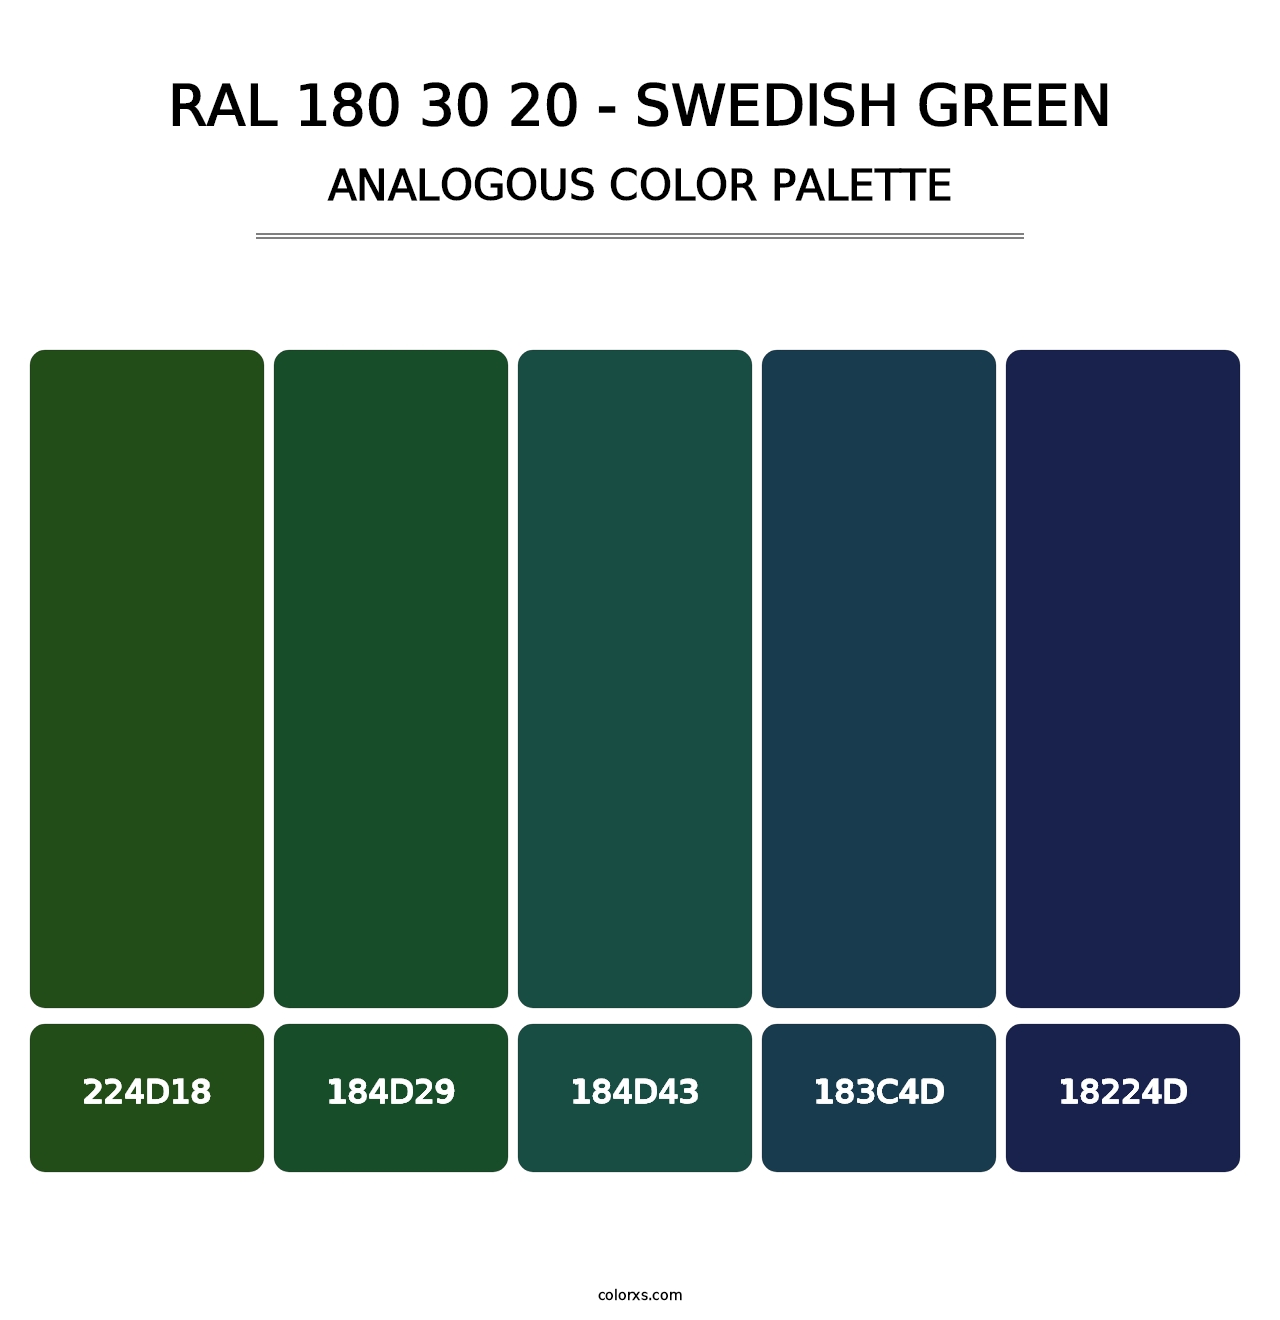 RAL 180 30 20 - Swedish Green - Analogous Color Palette